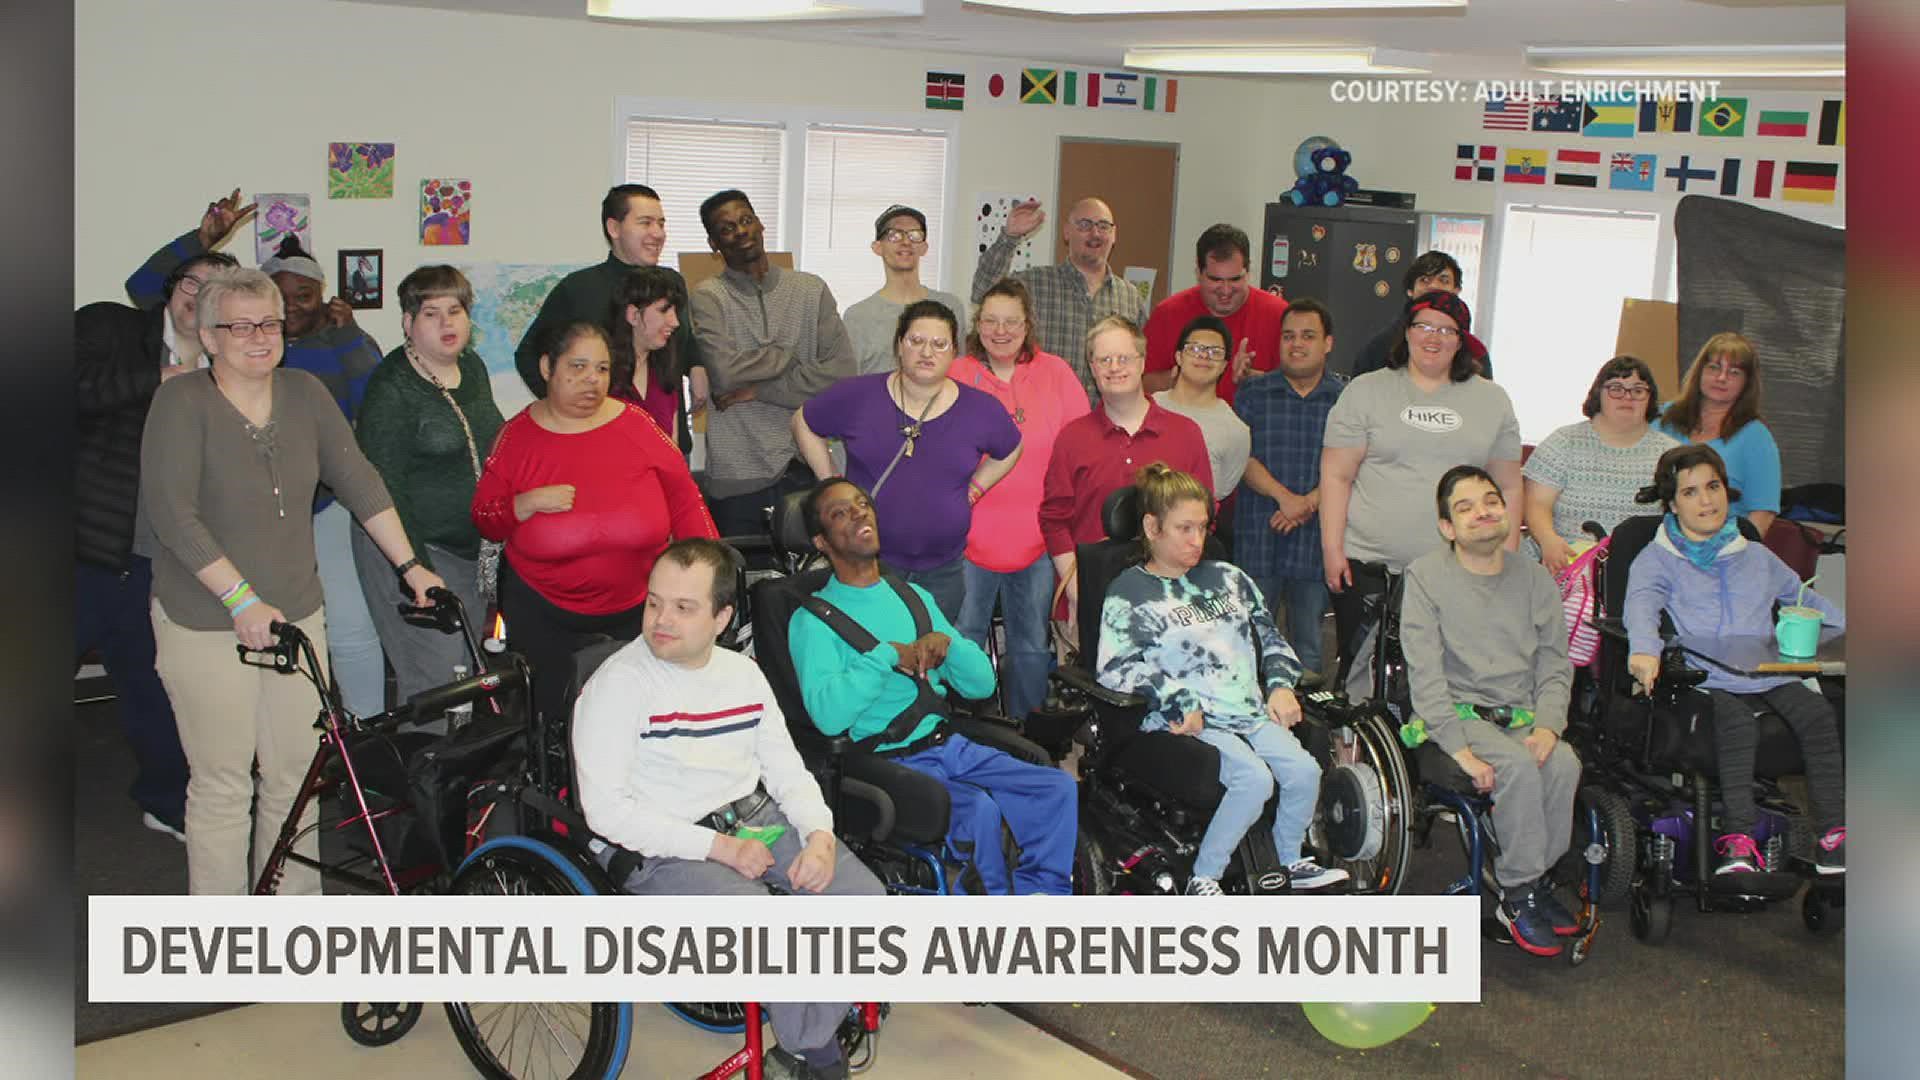 March is Developmental Disabilities Awareness Month, which seeks to spread knowledge of the challenges those who have disabilities face.